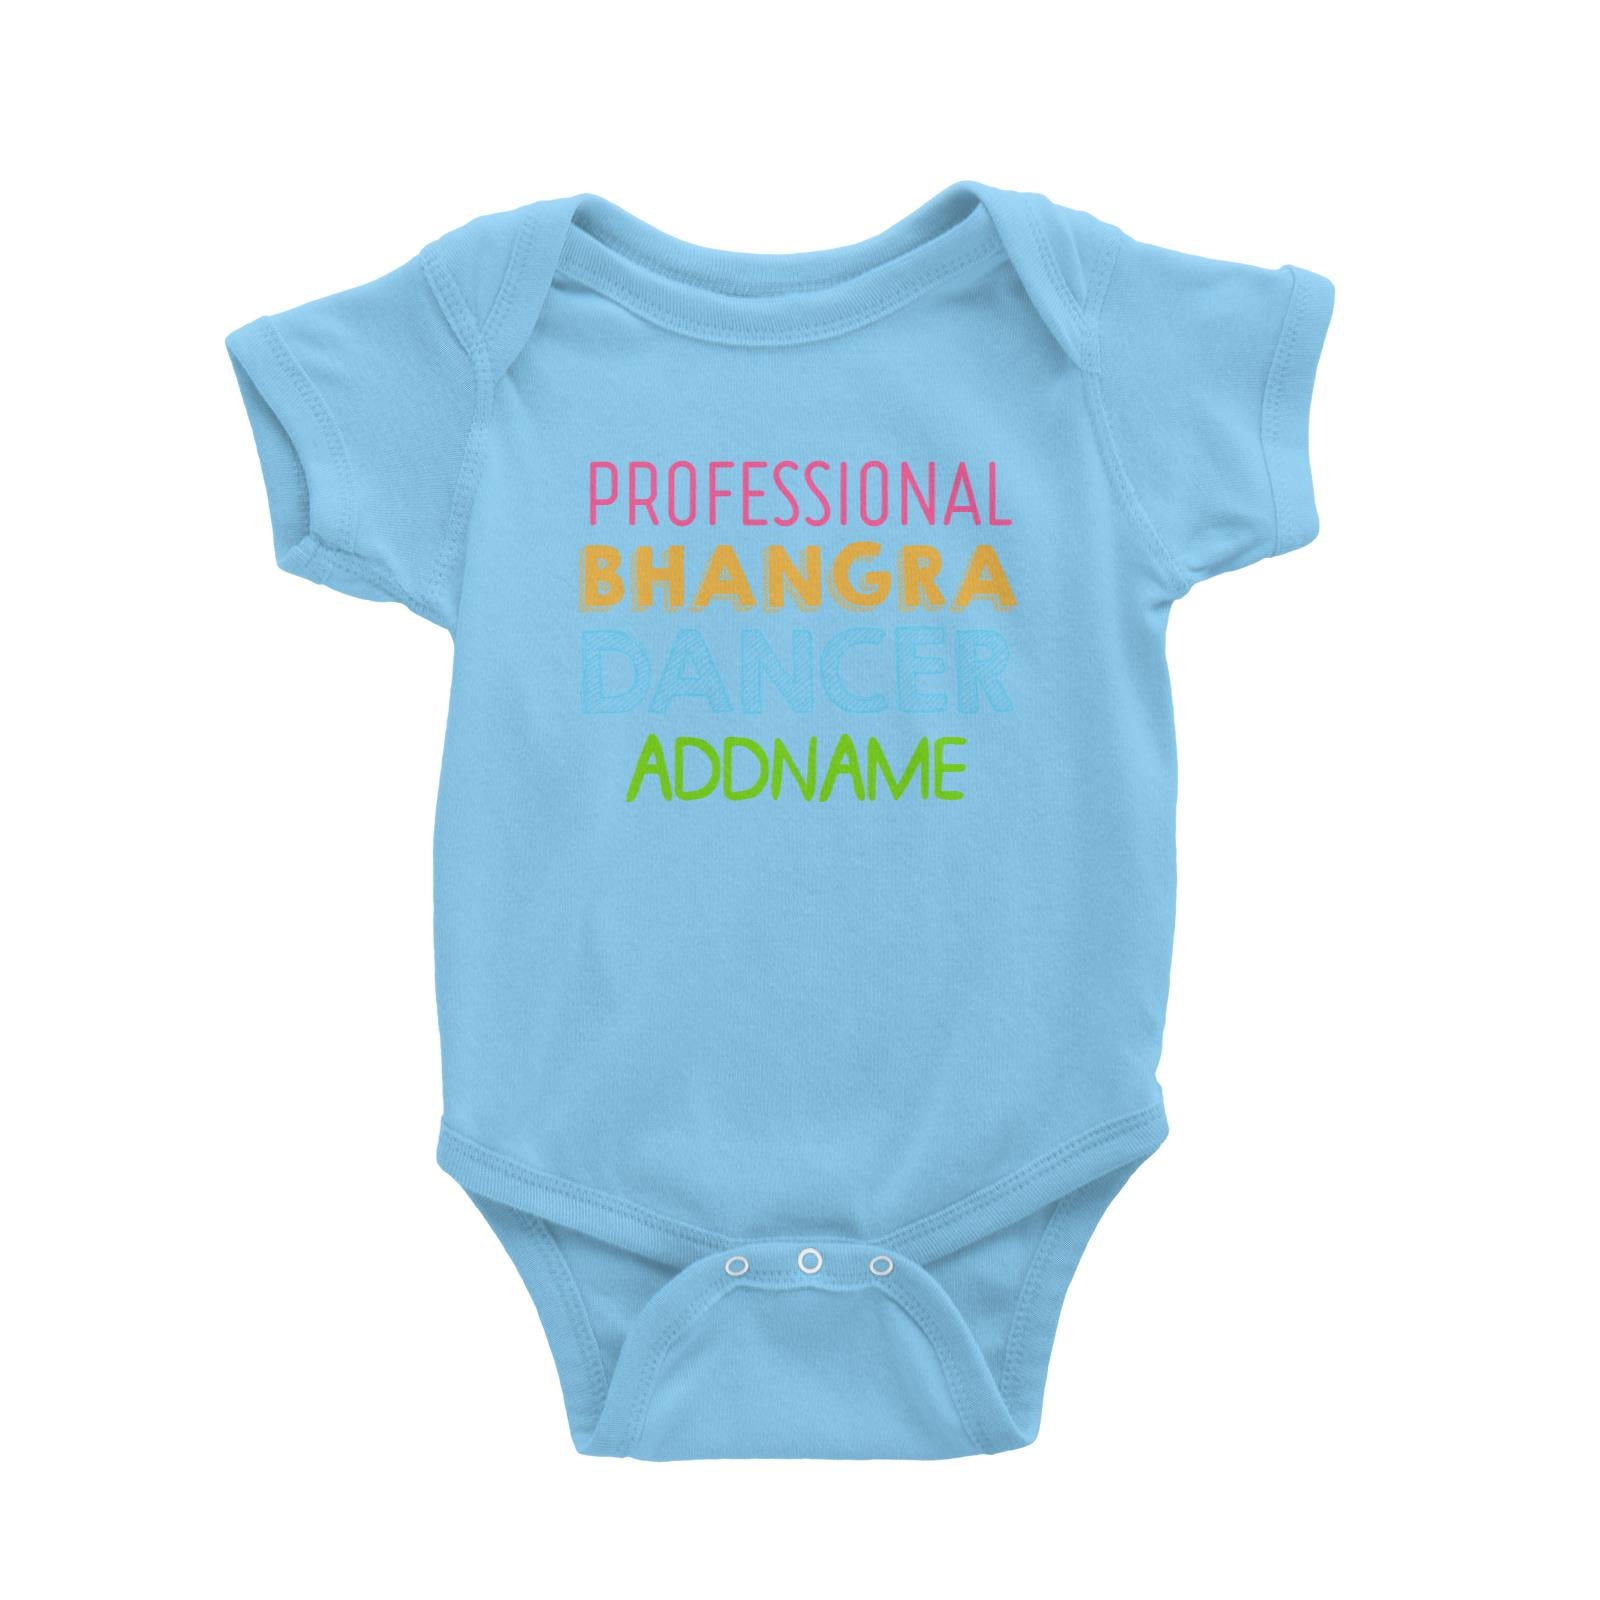 Professional Bhangra Dancer Addname Baby Romper